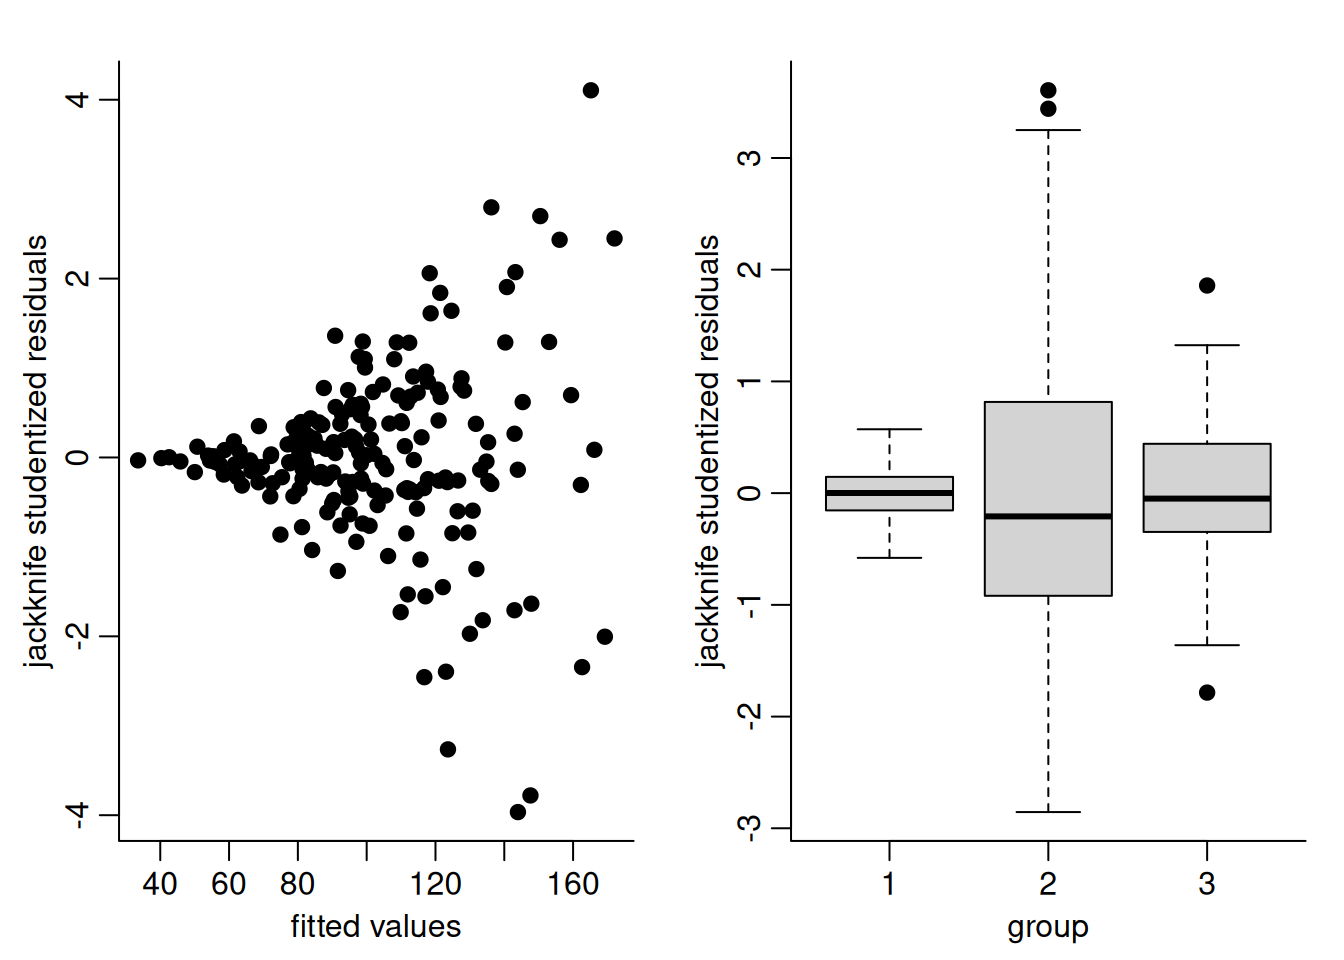 Plot of jackknife studentized residuals against fitted value (left) and categorical explanatory (right). Both clearly display heteroscedasticity.